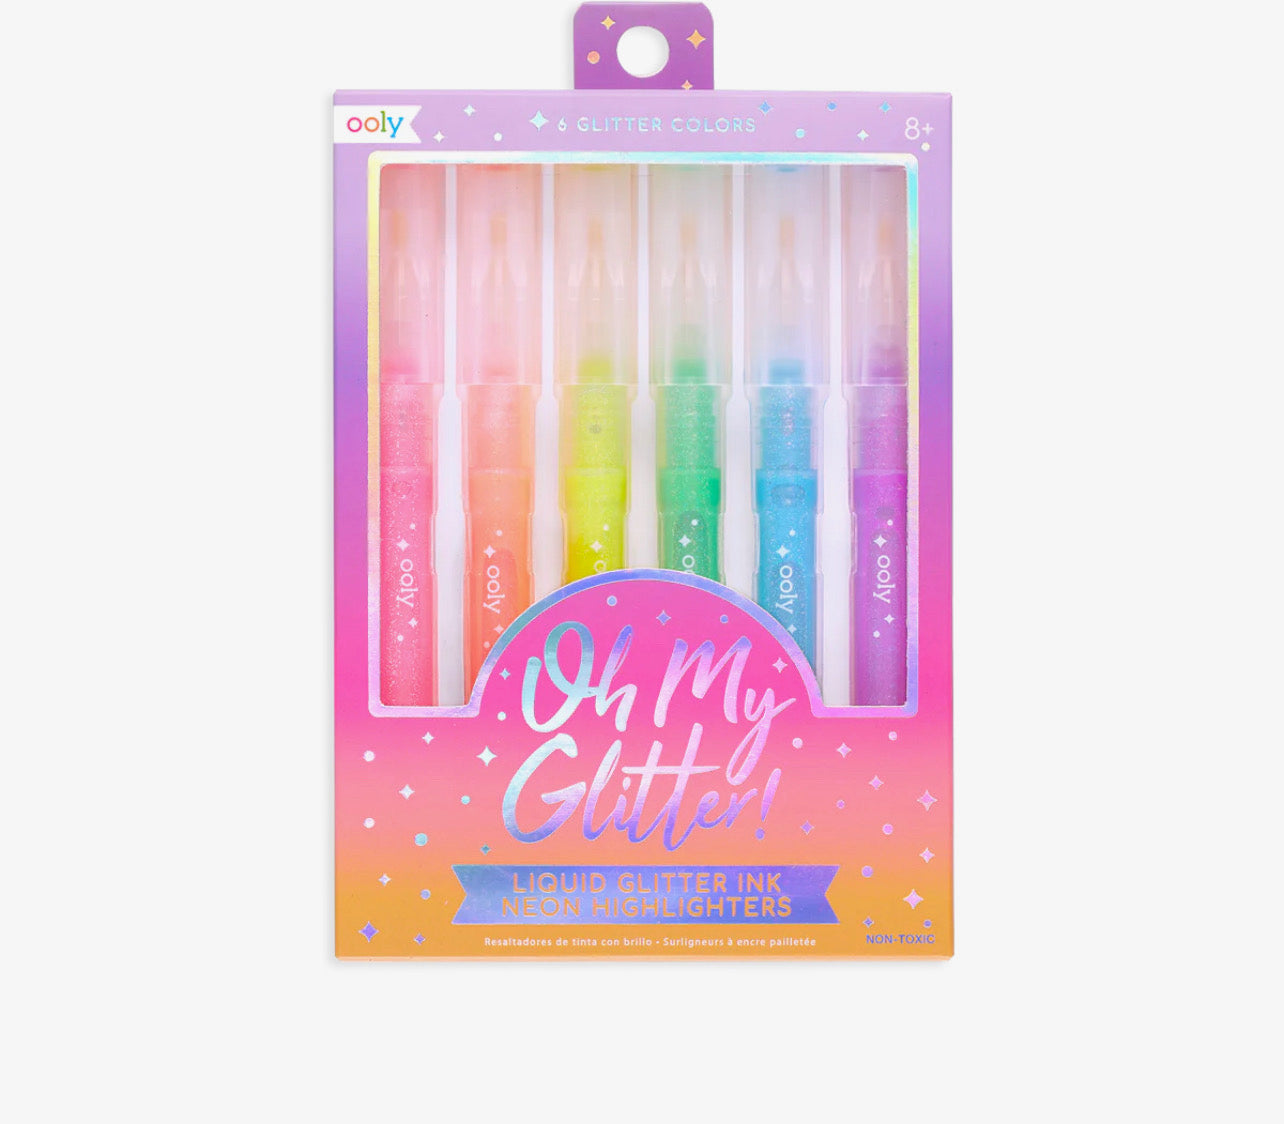 ooly Oh My Glitter Highlighters, Set of 6